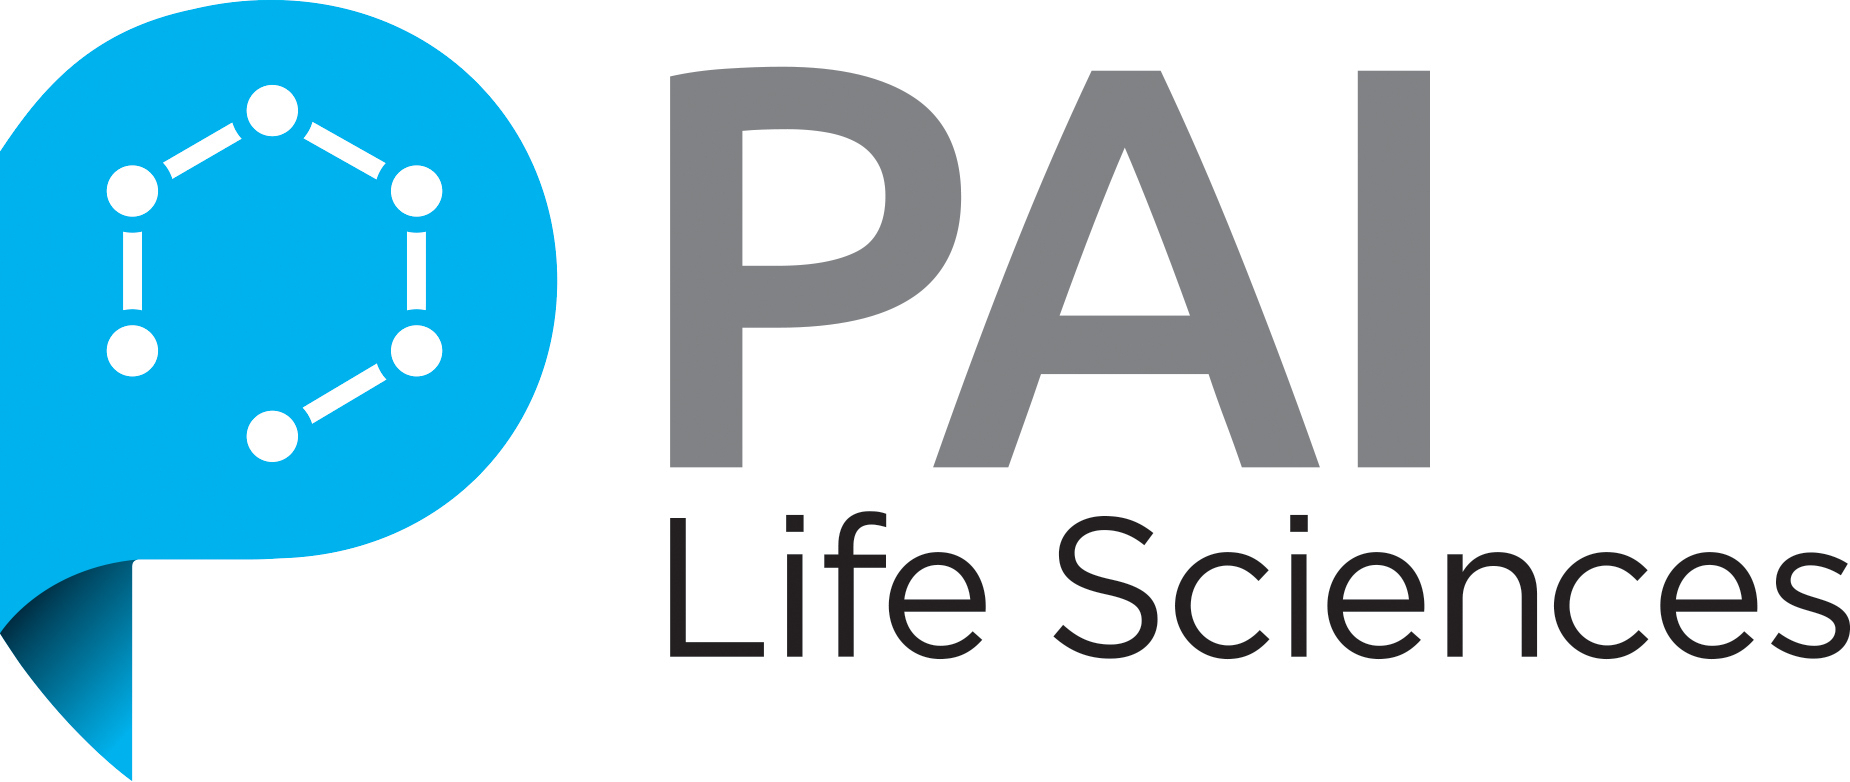 PAI Life Sciences – Serving the Underserved